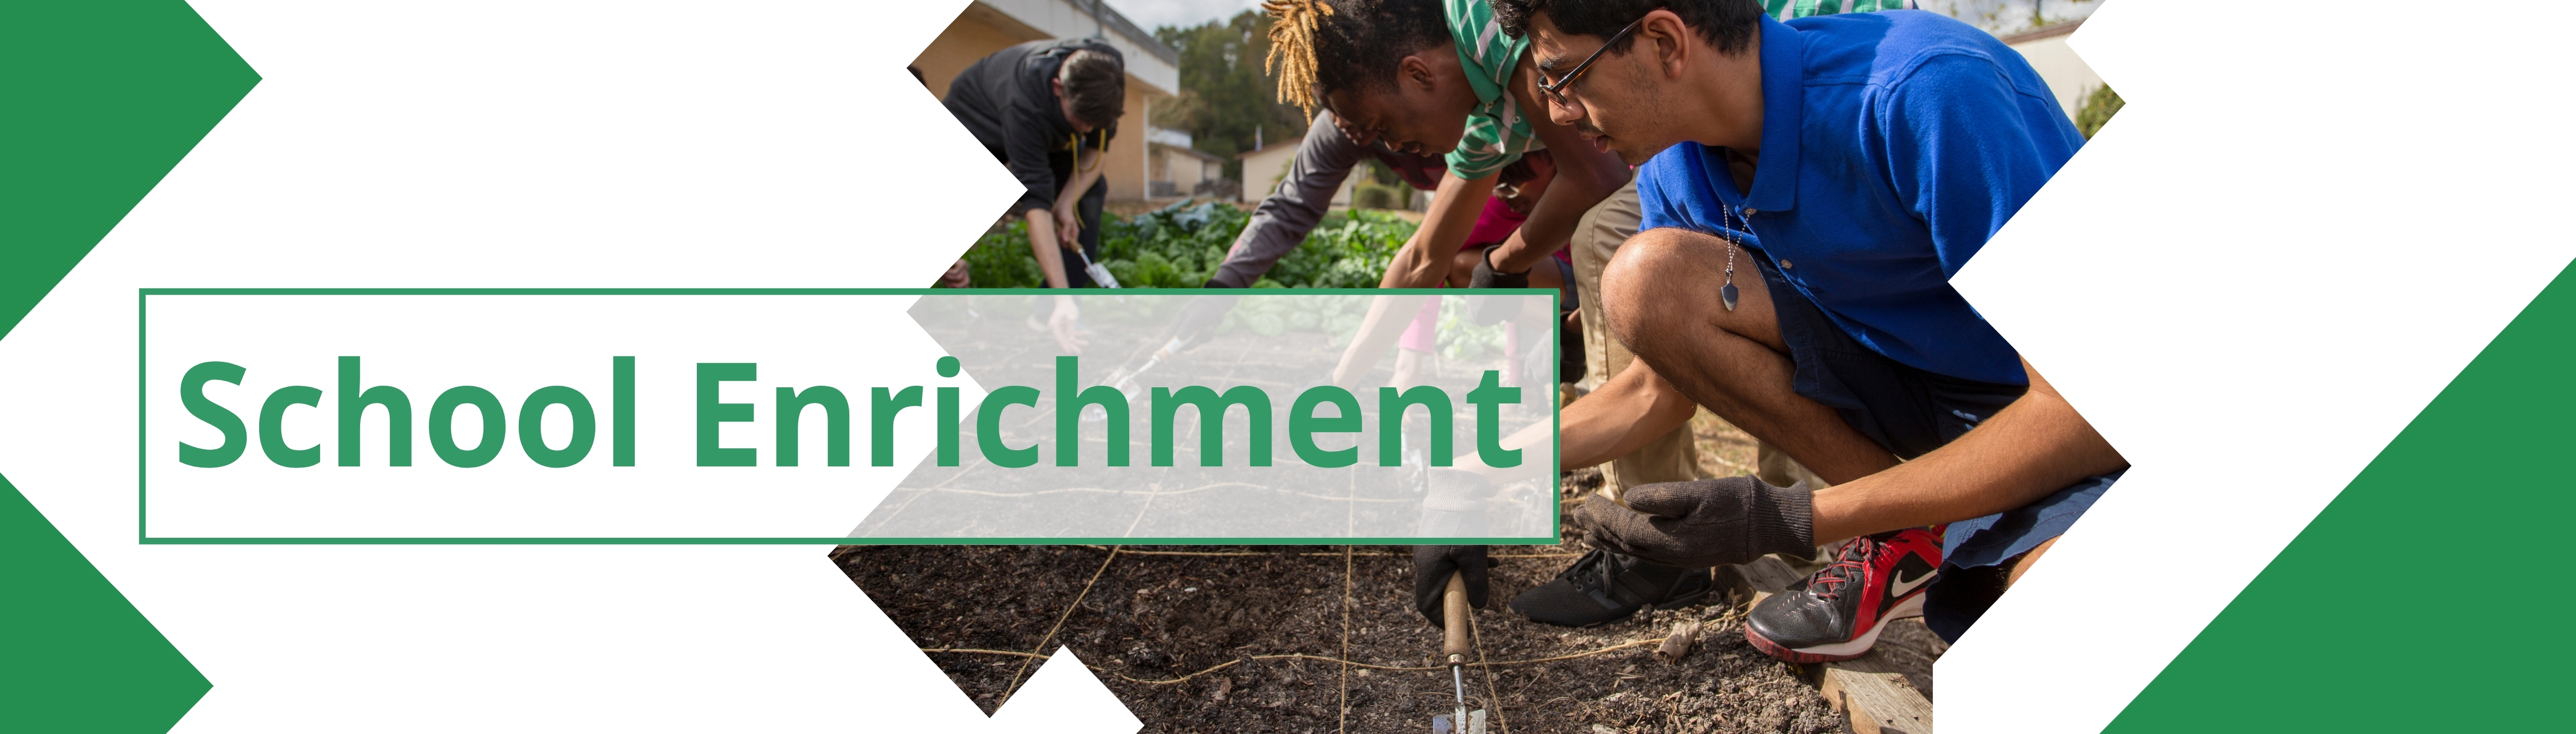 Banner graphic of high school youth planting seeds in school's garden